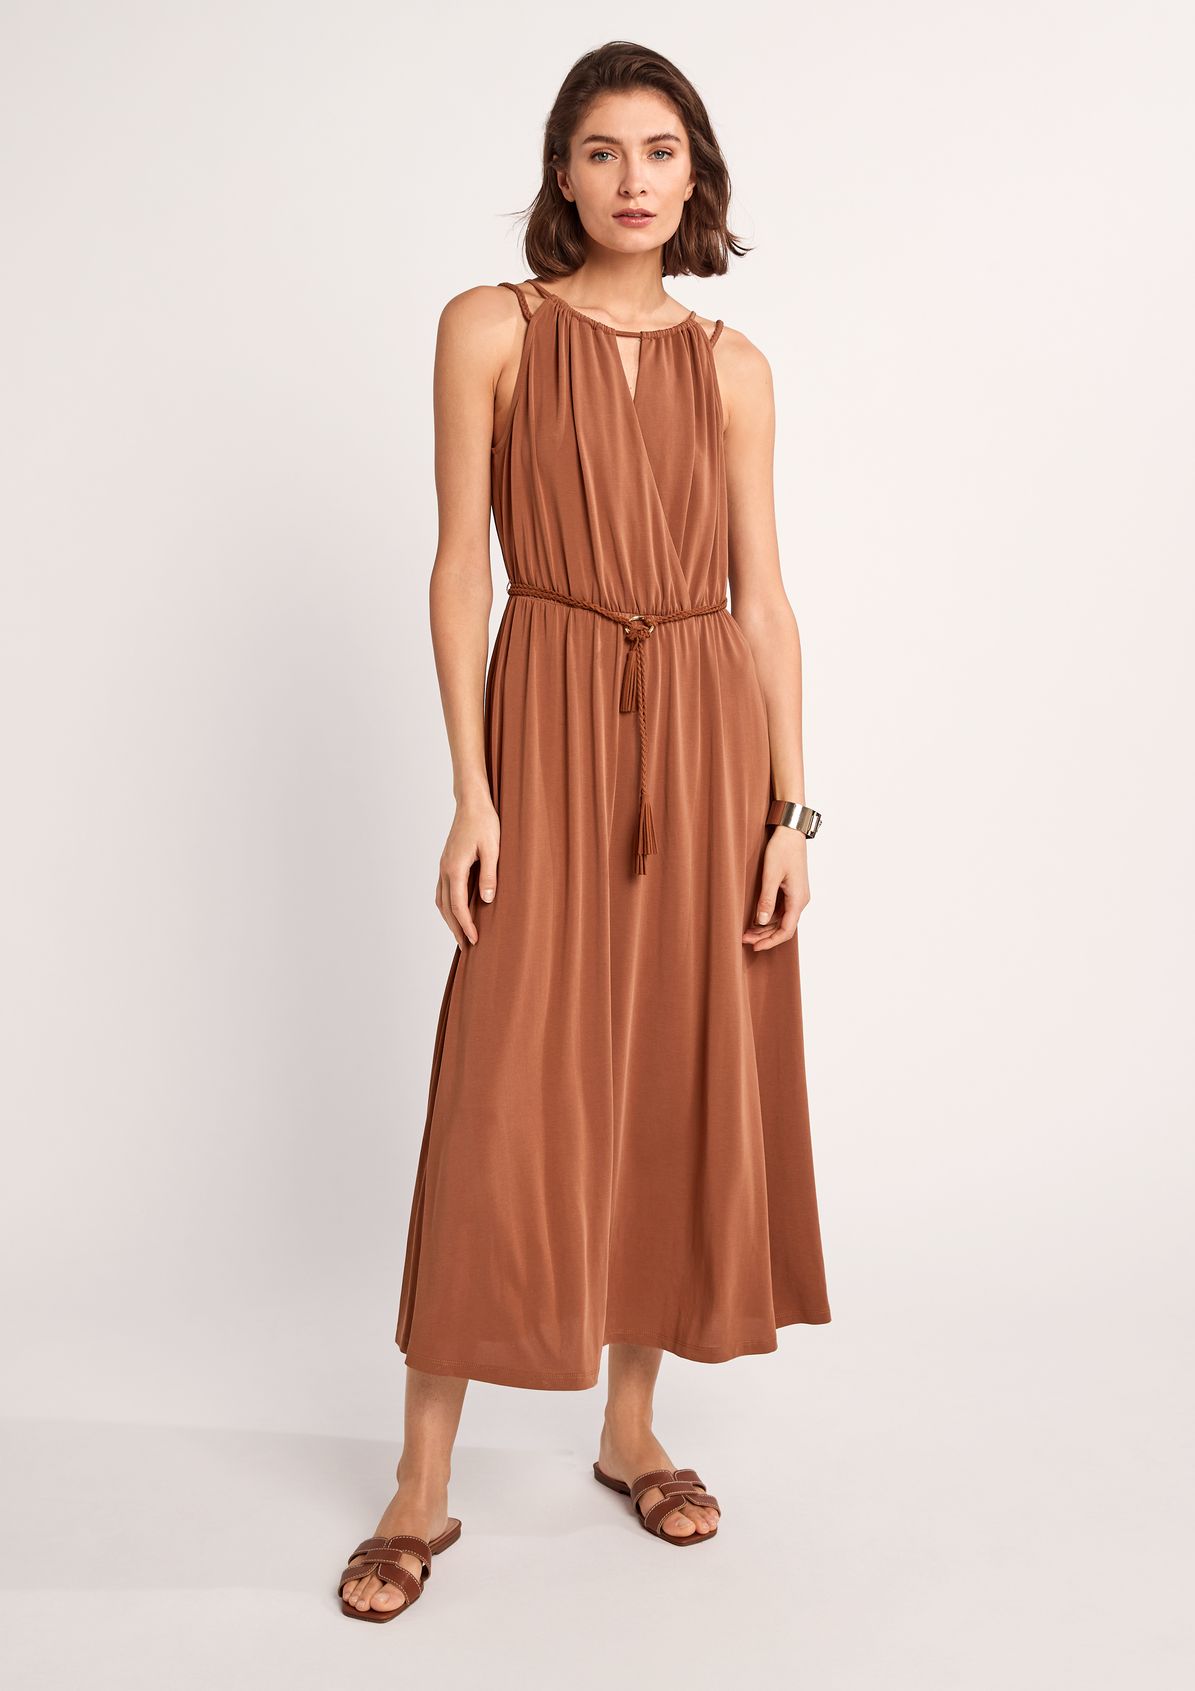 Blended modal dress with a braided belt from comma